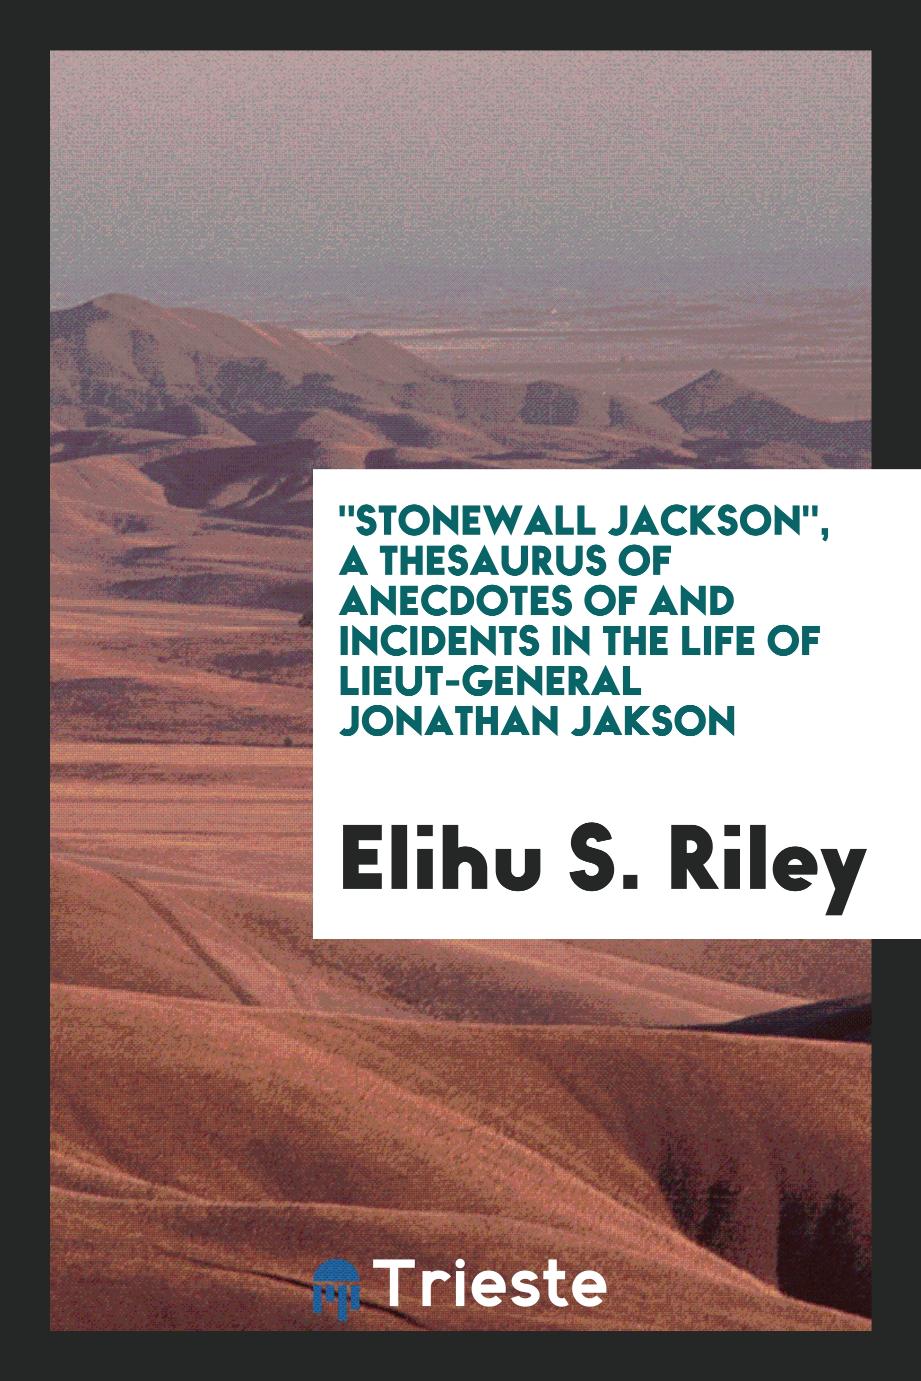 "Stonewall Jackson", a thesaurus of anecdotes of and incidents in the life of Lieut-General Jonathan Jakson